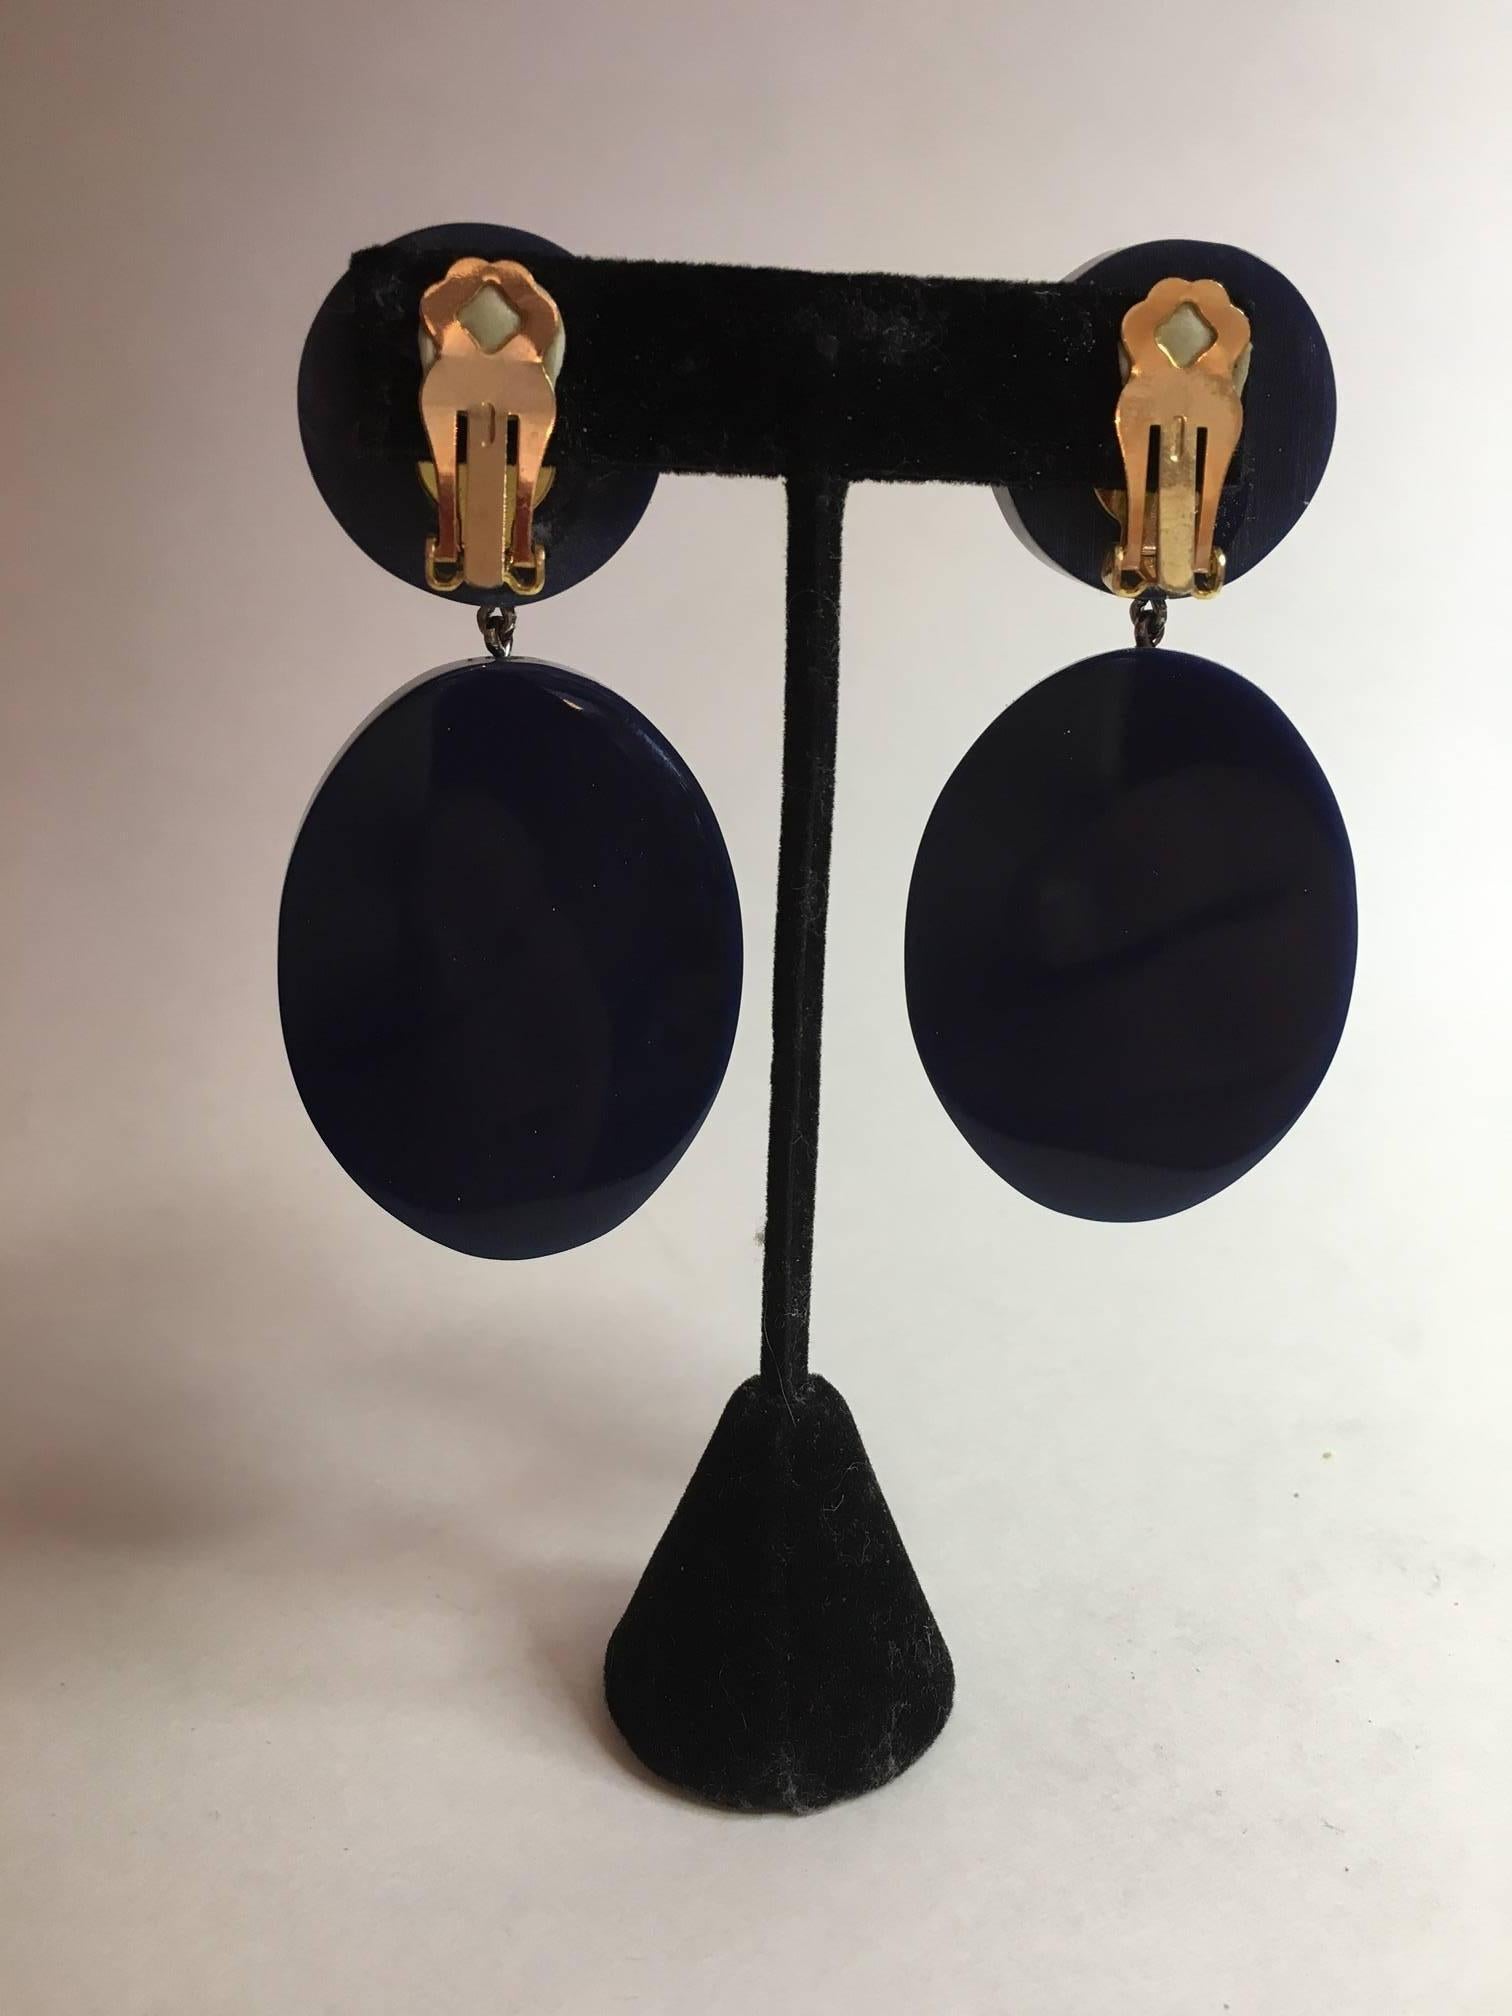 RARE Navy blue acrylic drop earrings by Judith Hendler are from the 1980s and have domed pearl embellishment.Large circular upper element with original clip backs suspend a large long oval element. Earrings have over 2